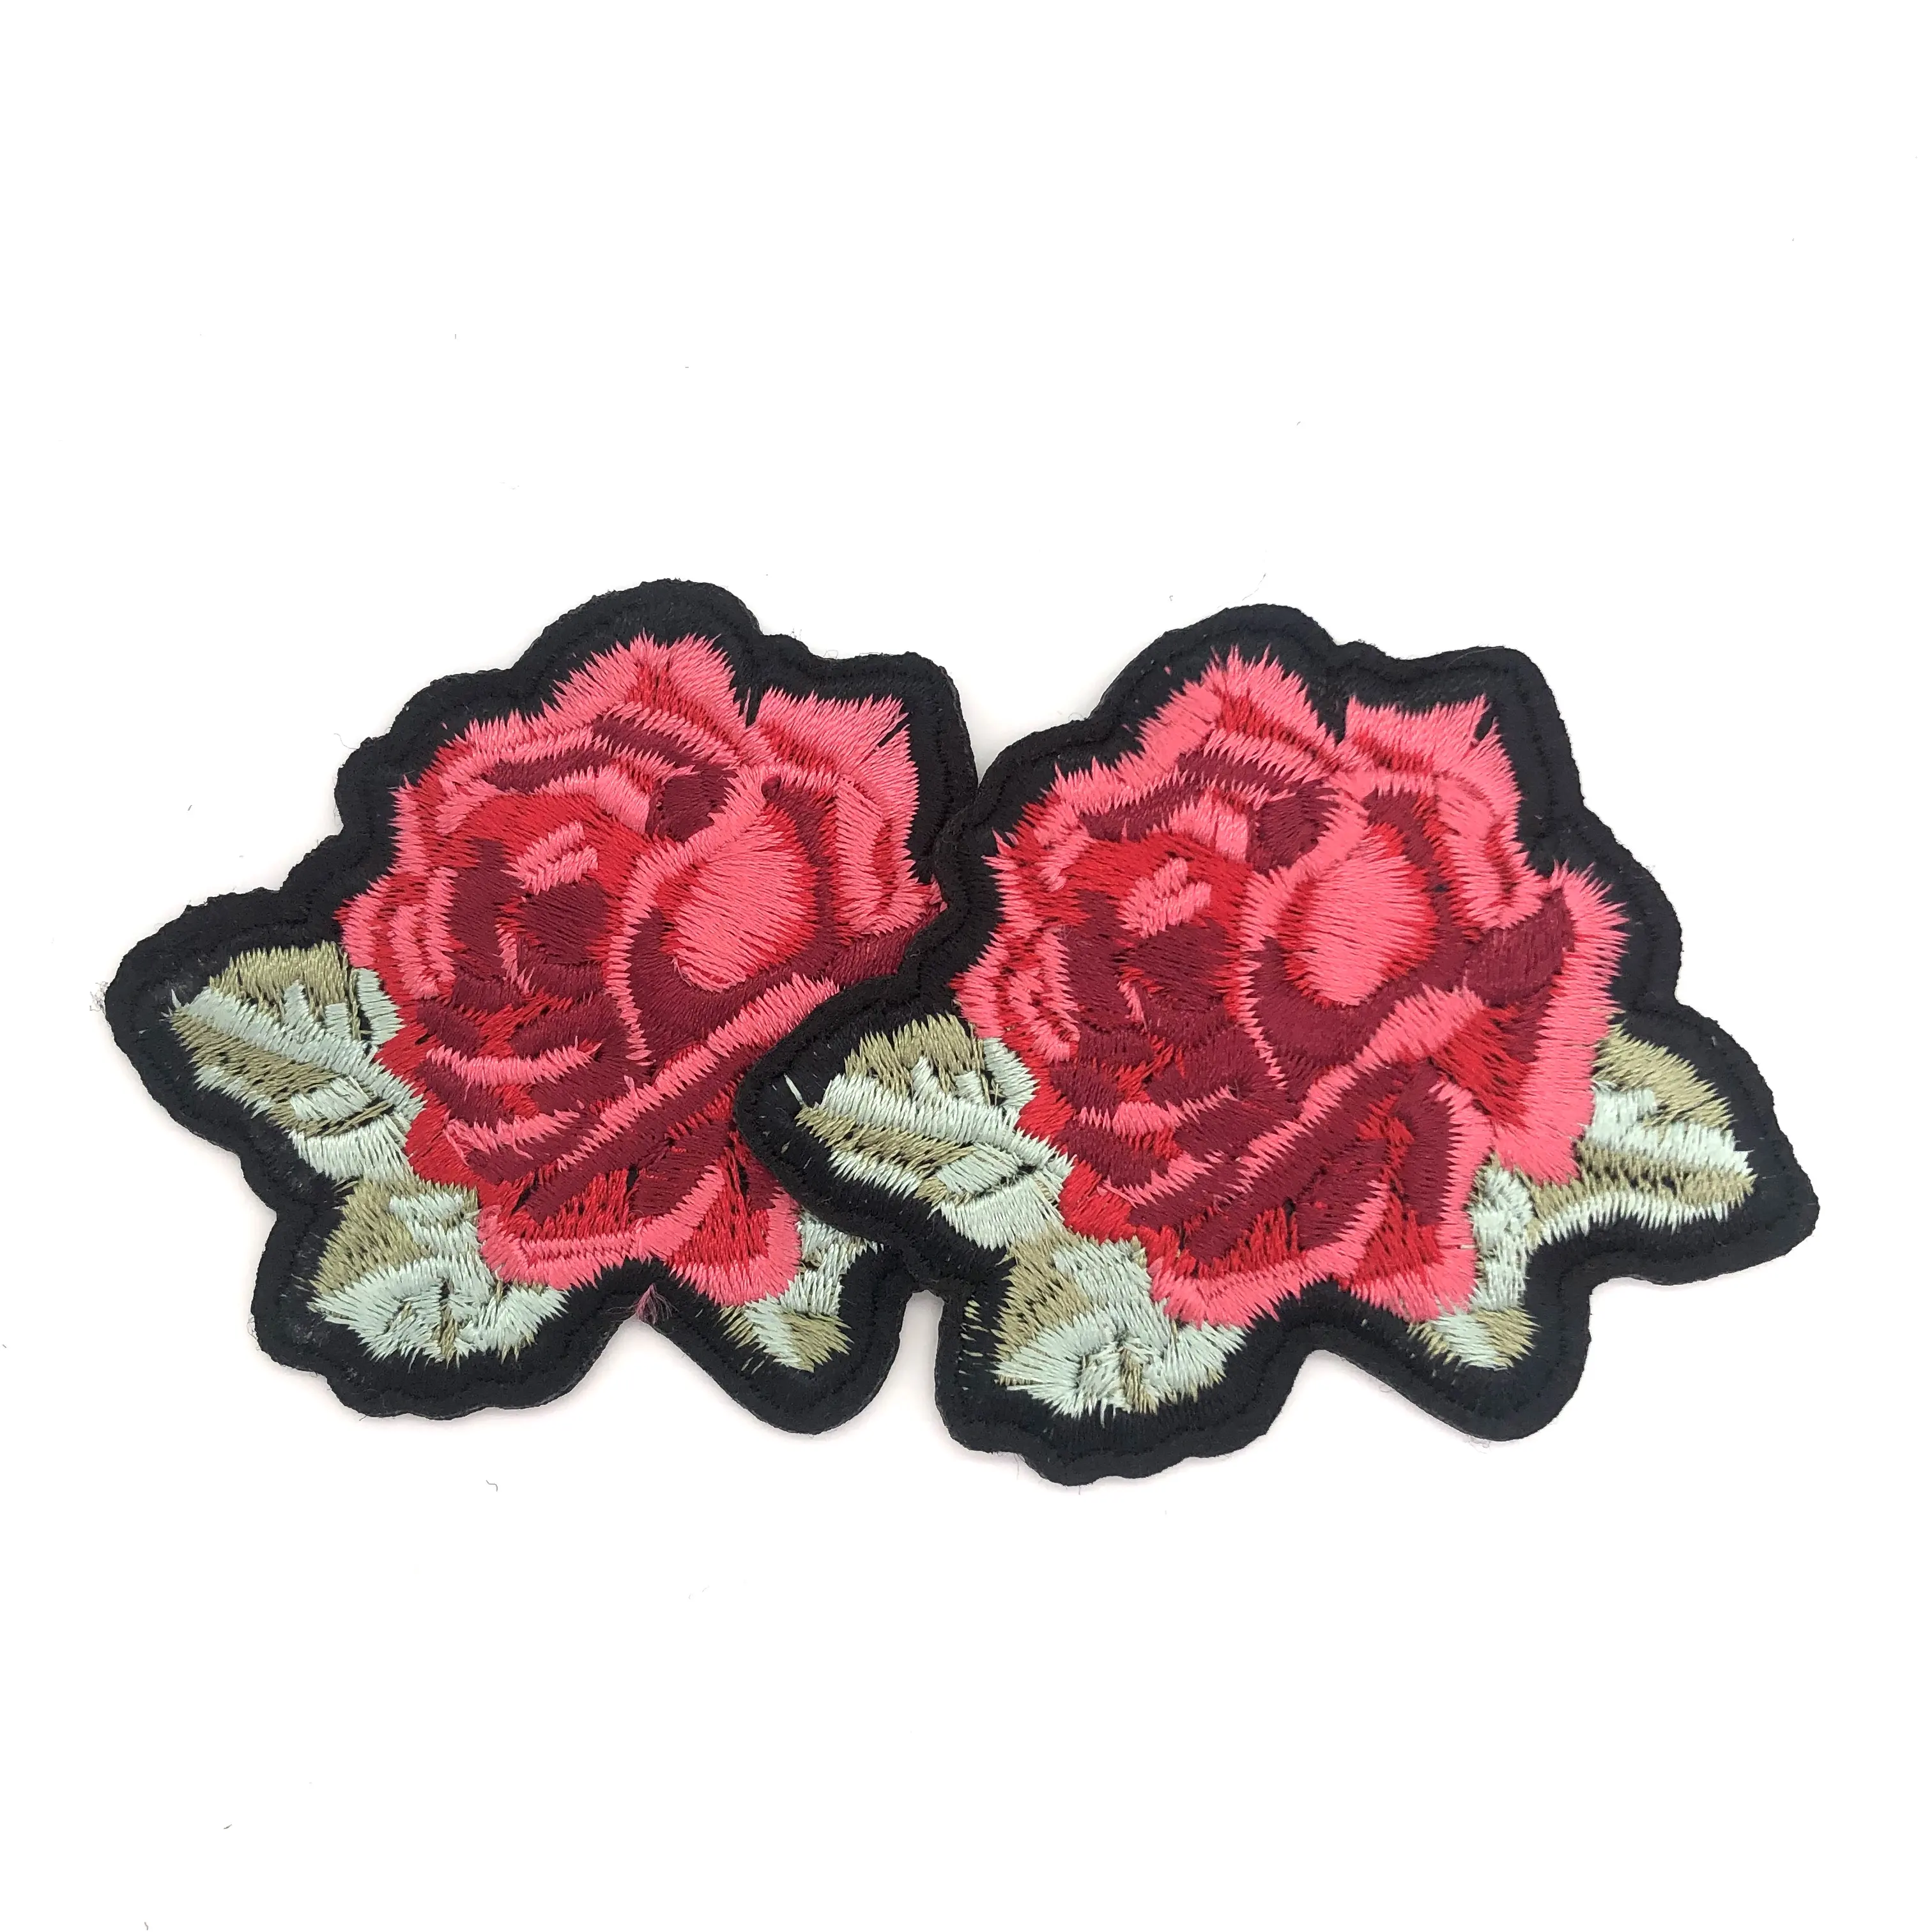 Embroidered Applique Patch Hand Made Embroidered Flower Applique Patch Colorful Red Rose Patches High Quality